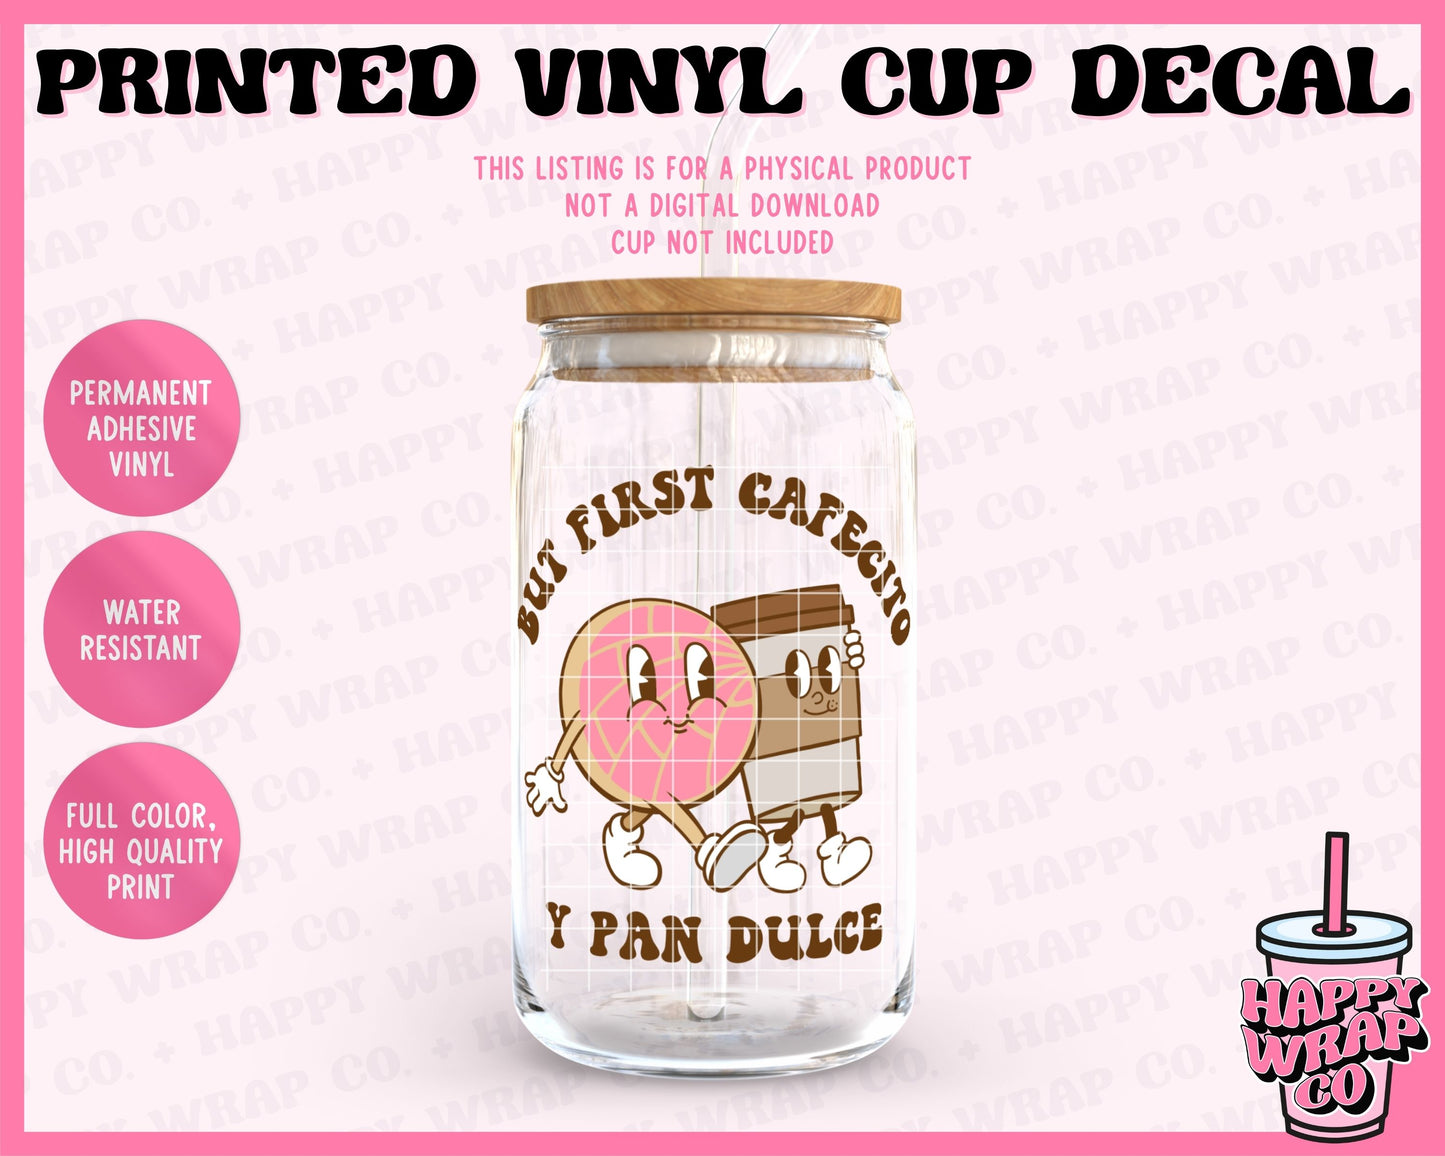 But First Cafecito y Pan Dulce - Vinyl Cup Decal